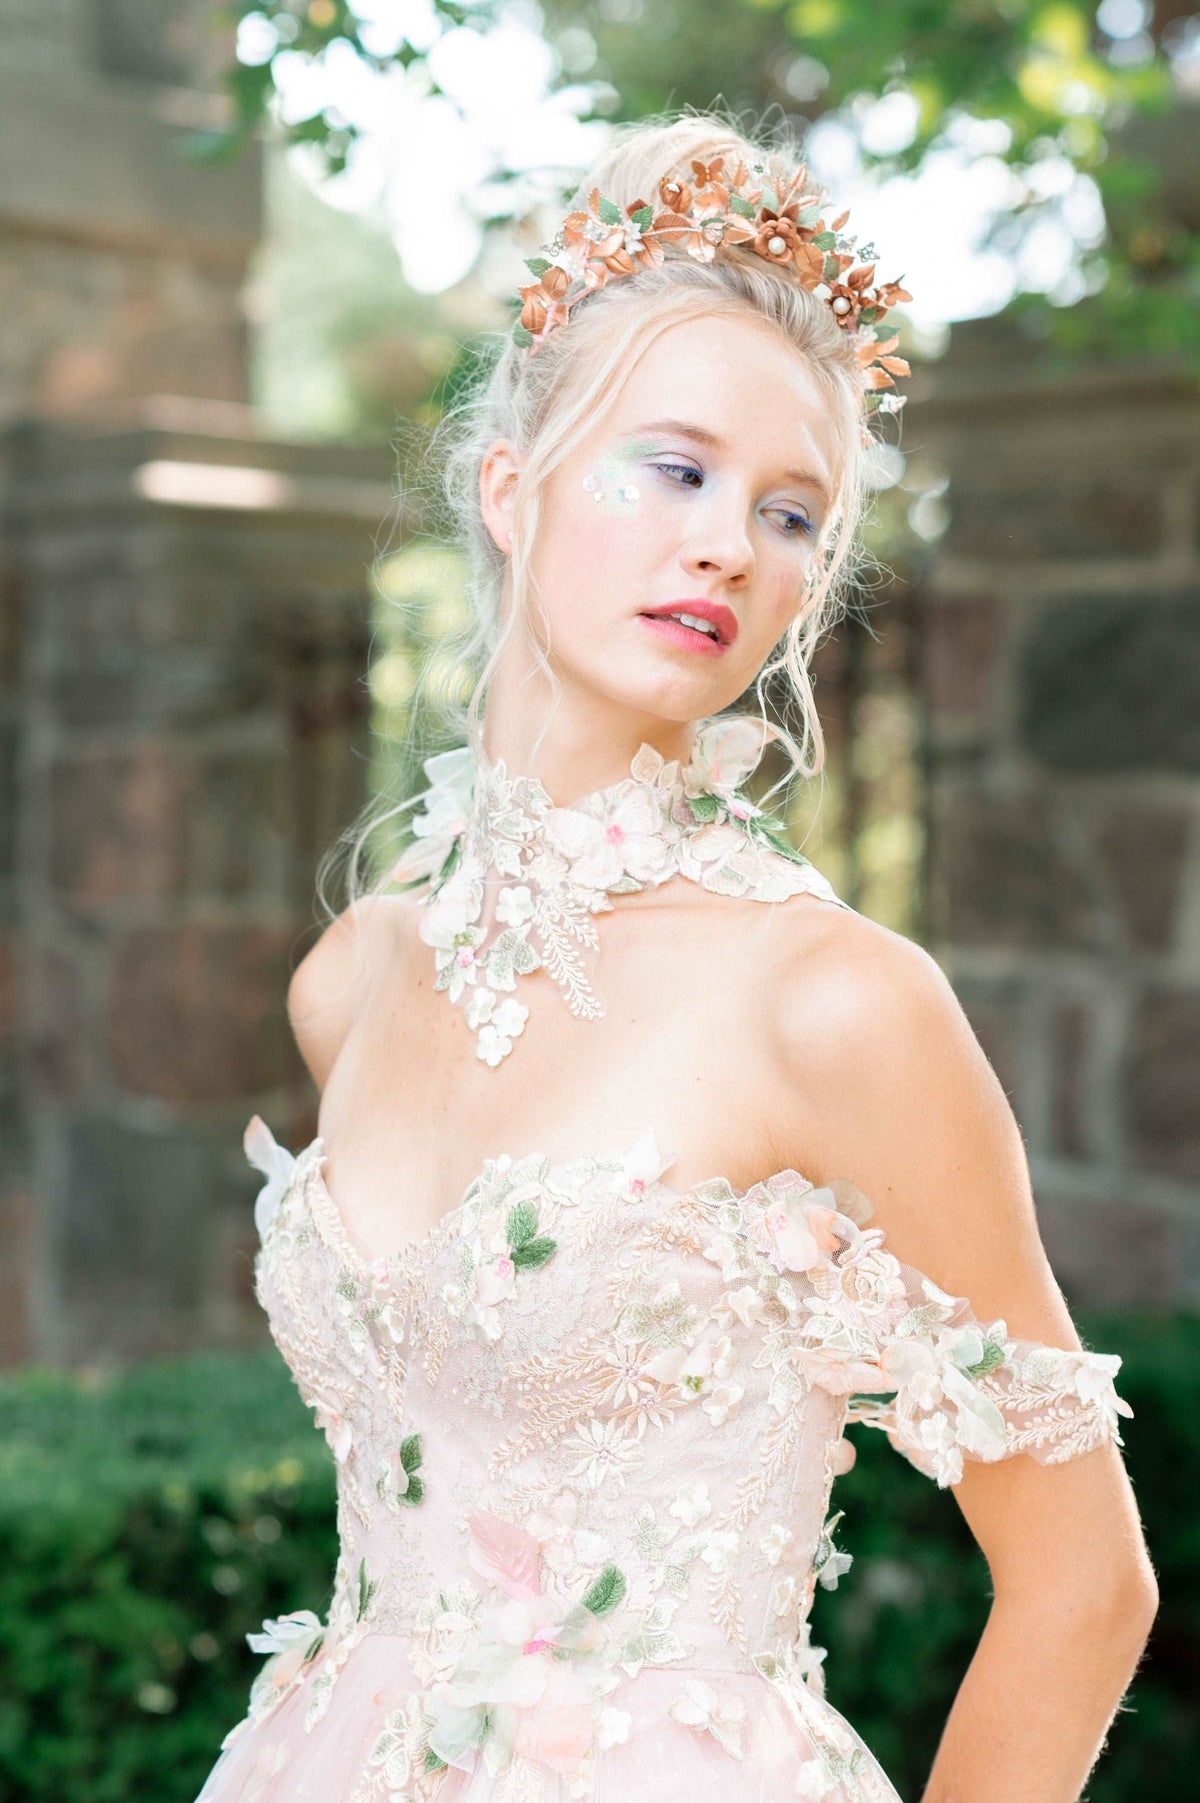 Whimsical fairy core inspired pink wedding dress for unconventionally cool brides. Custom made by Catherine Langlois, Toronto, Canada